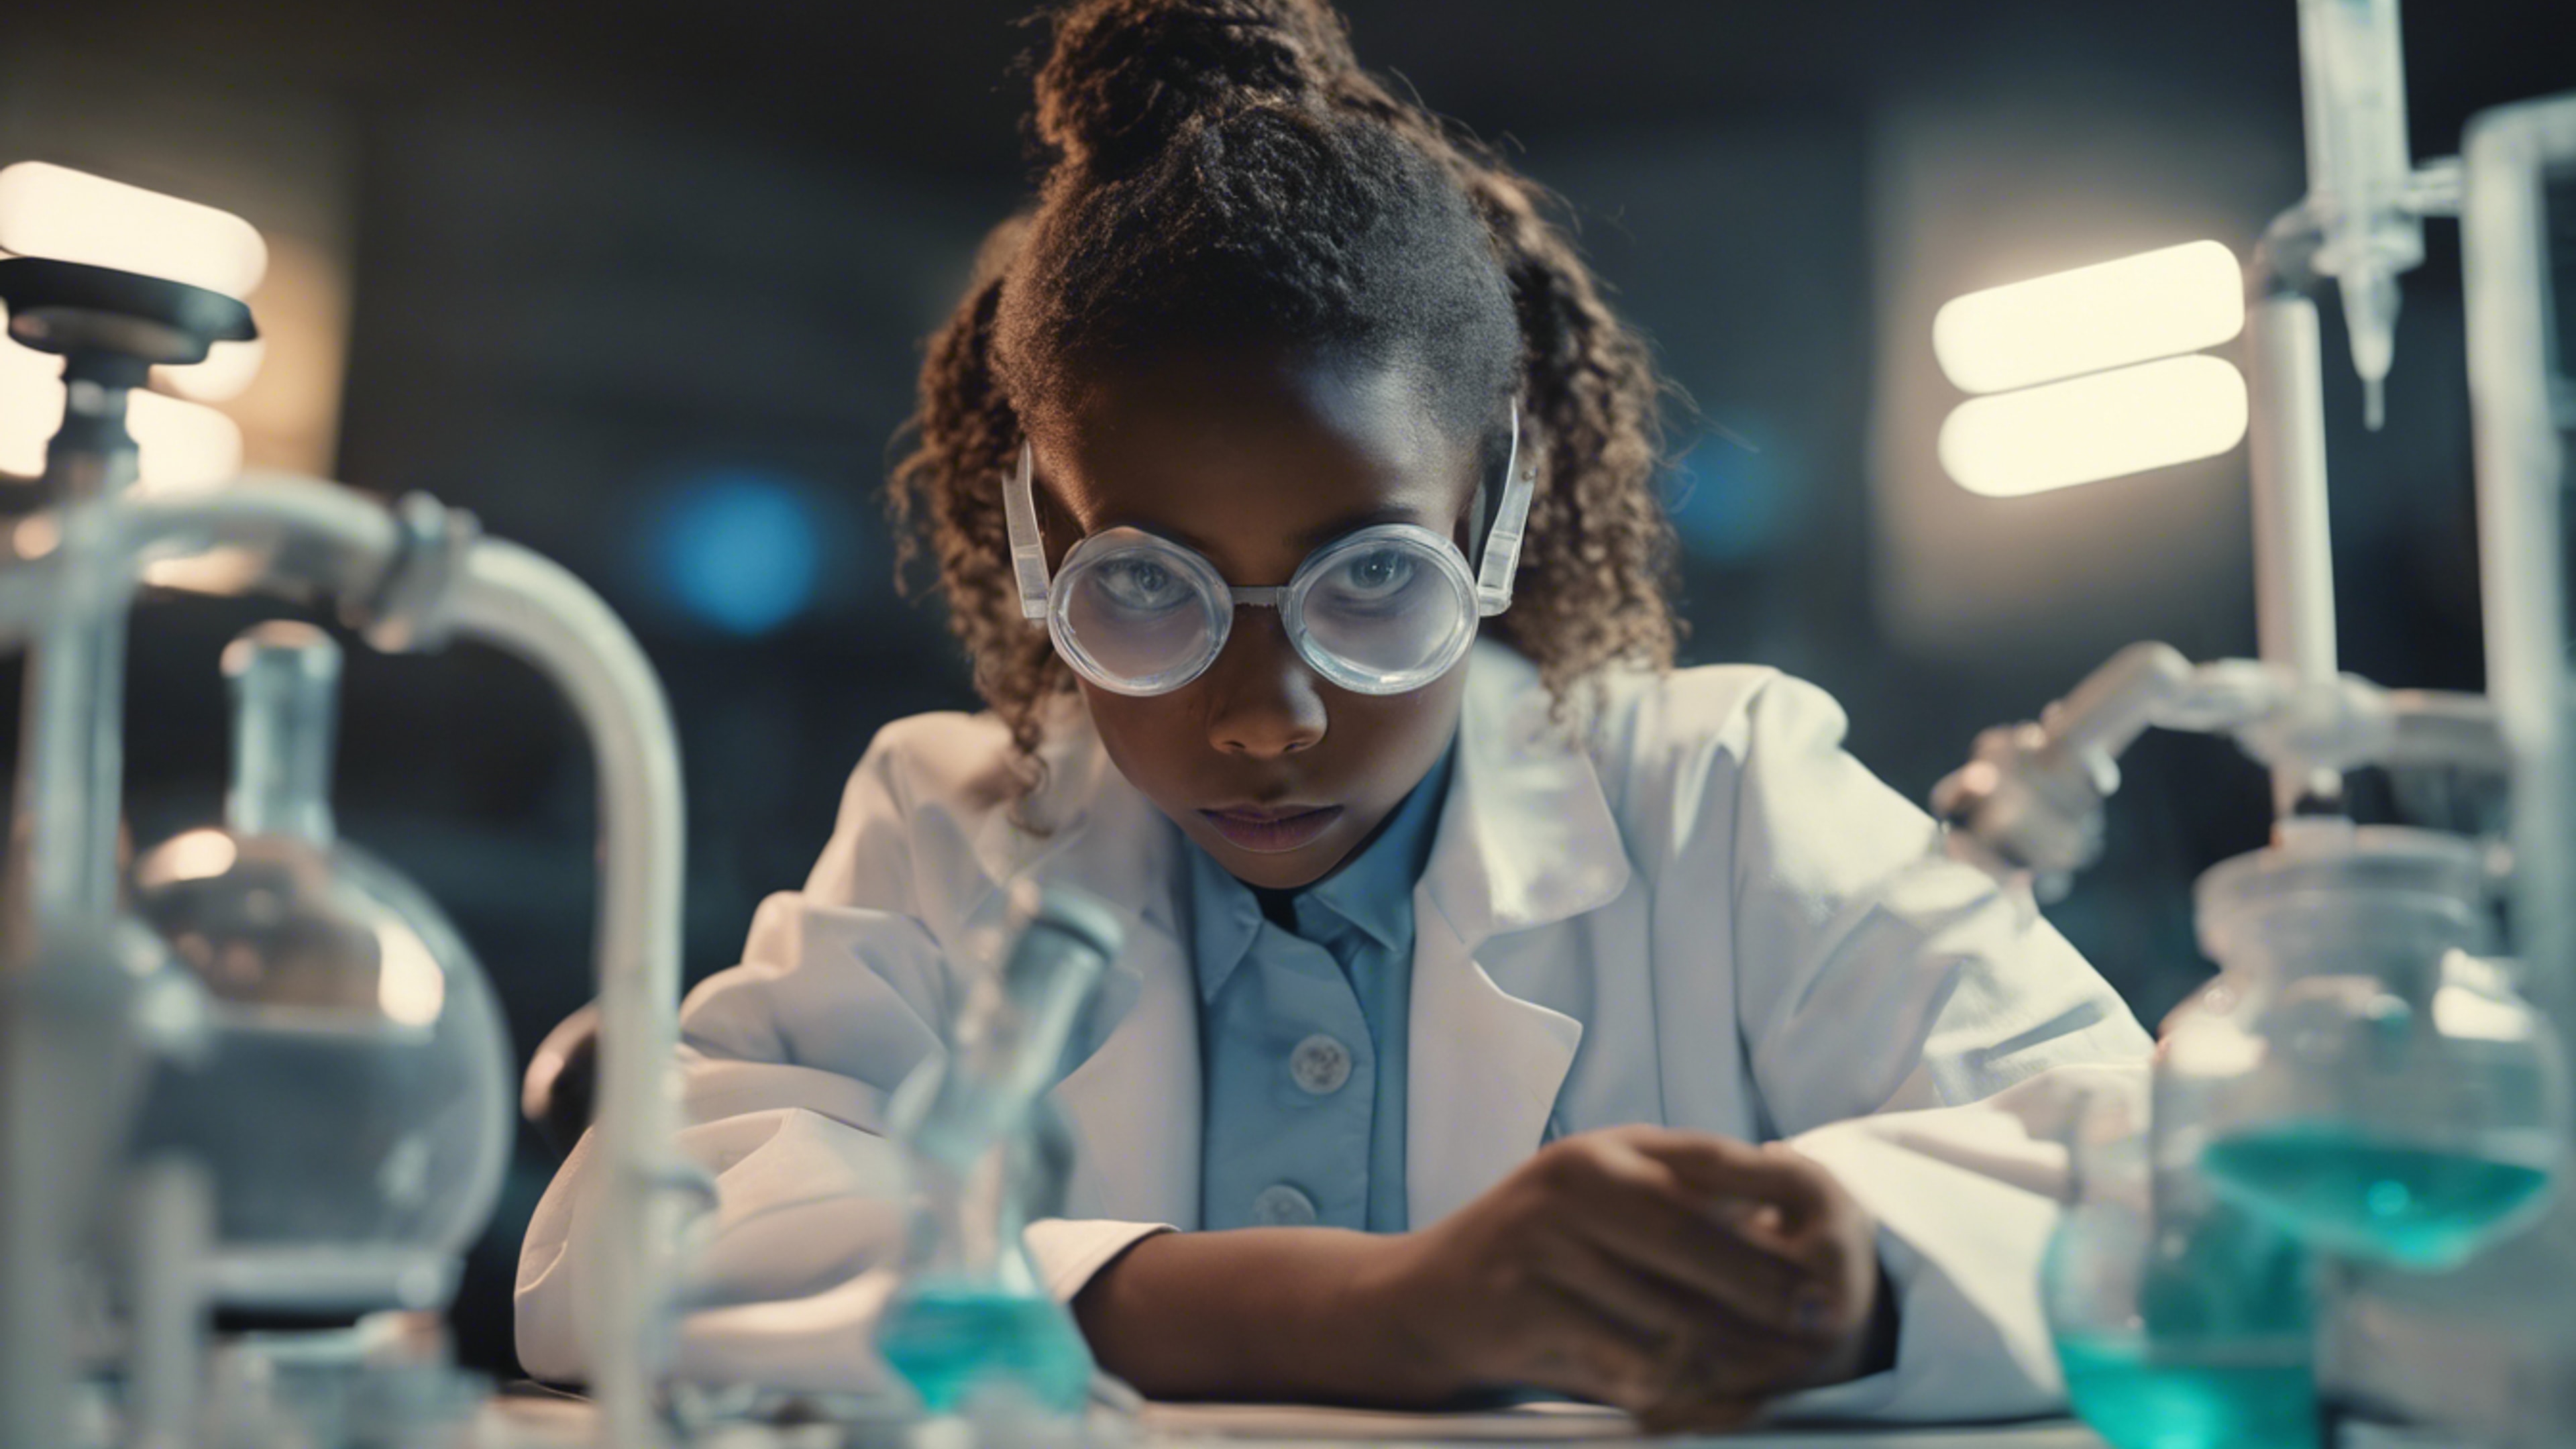 A young black girl wearing goggles and lab coat immersed in doing science experiment.壁紙[448c919503a247f79693]